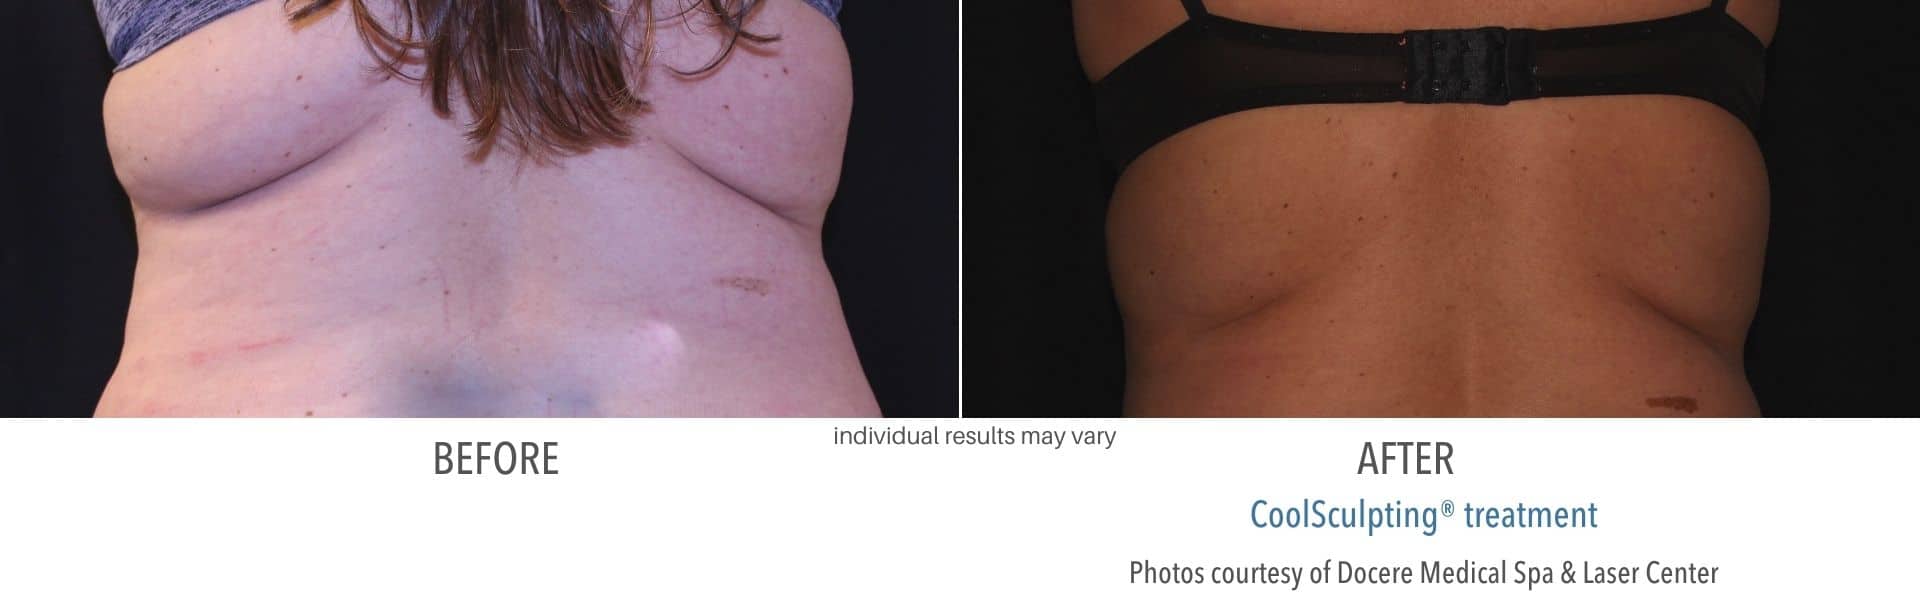 CoolSculpting real patient result from Docere Medspa